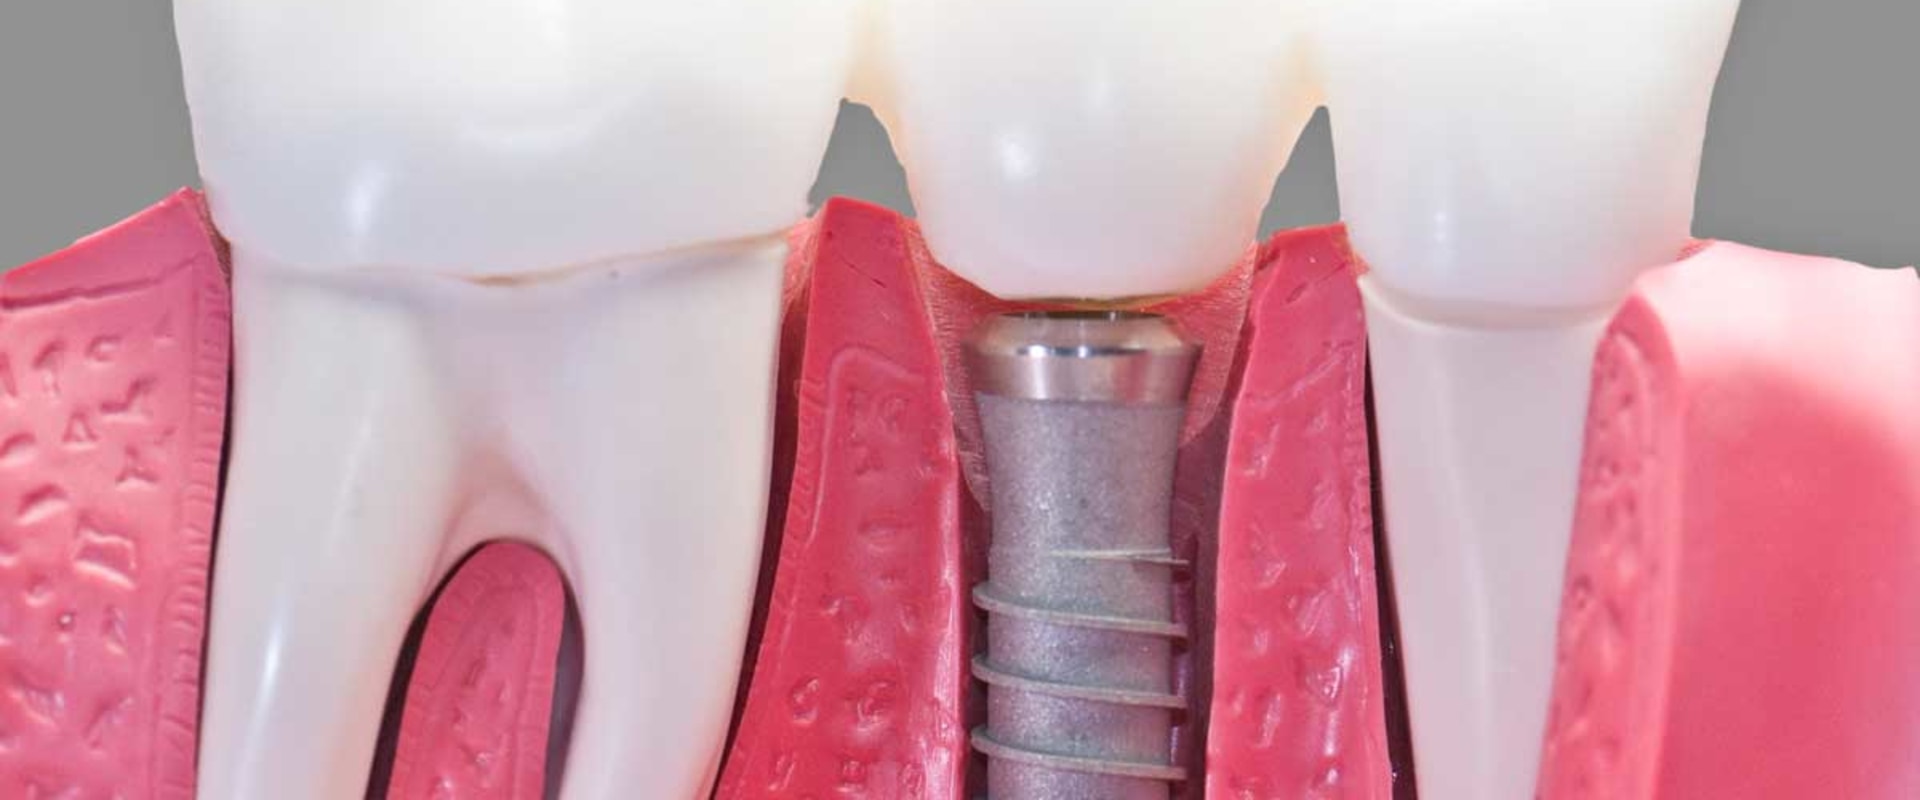 How common is the rejection of dental implants?